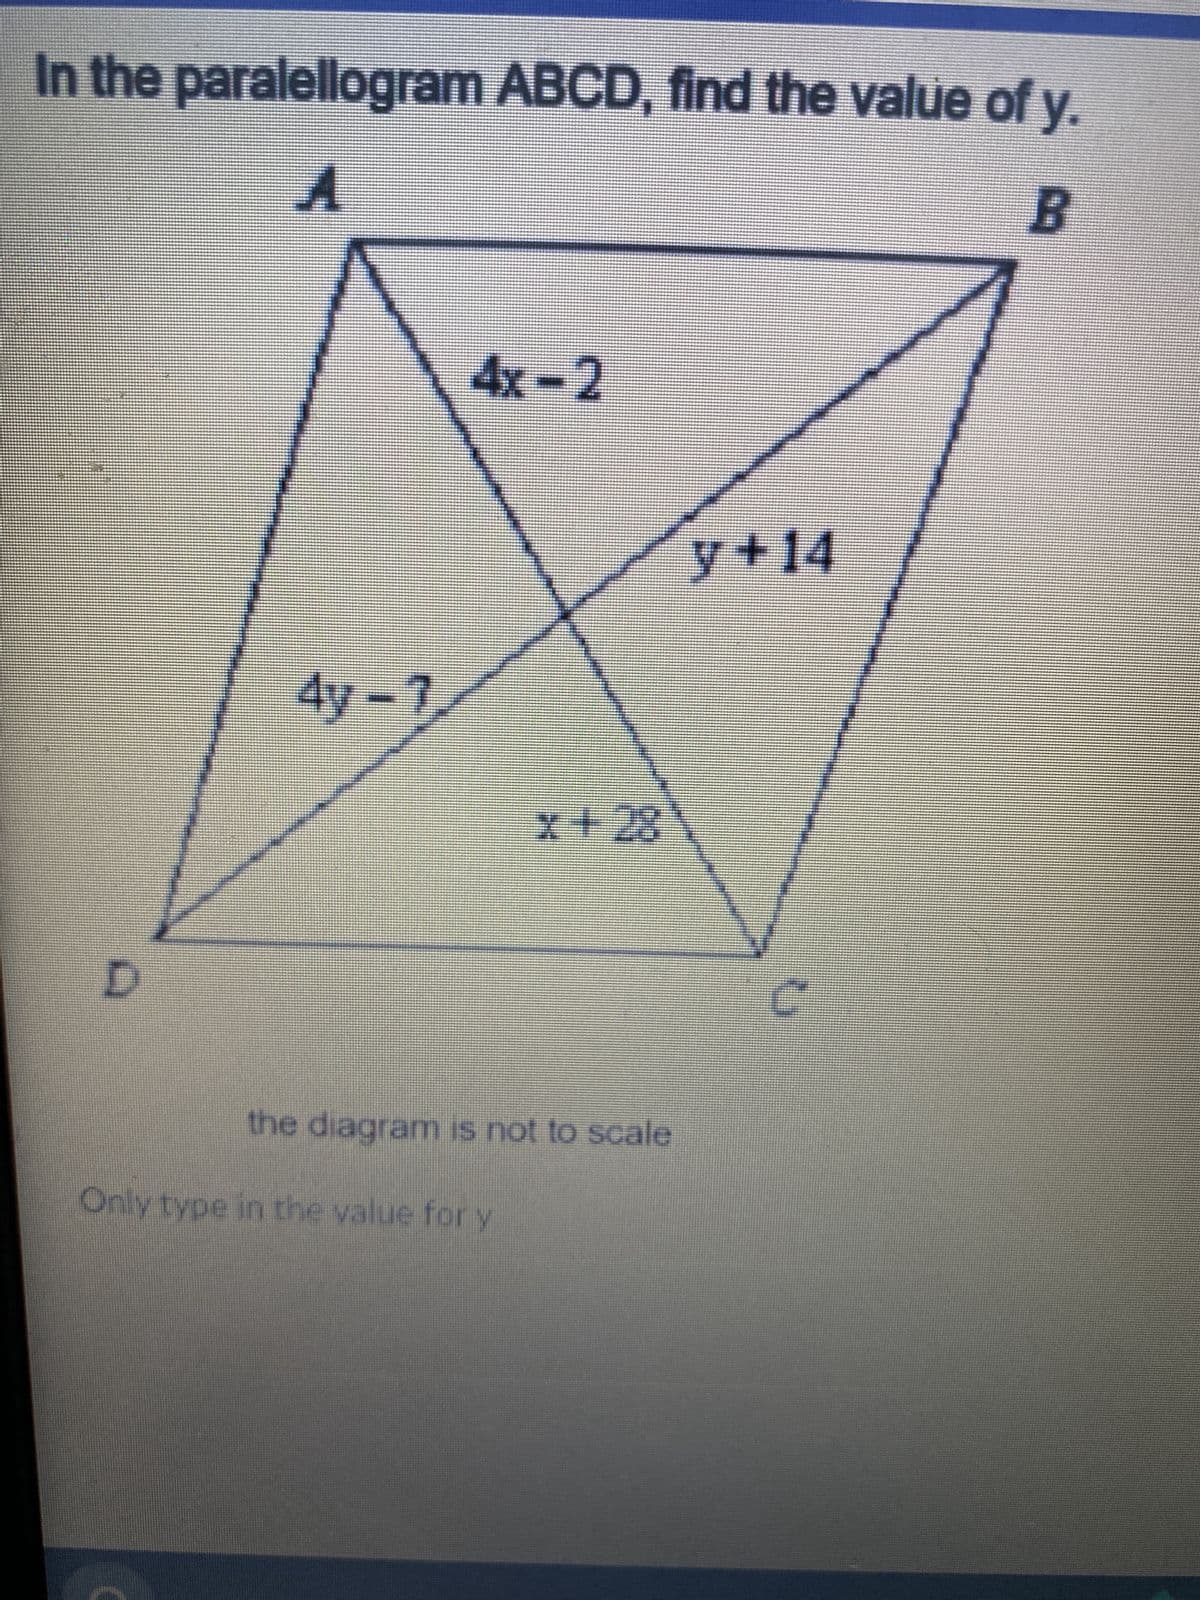 In the paralellogram ABCD, find the value of y.
4x-2
y+14
4y-7
x+28
the diagram is not to scale
Only type in the value for y
